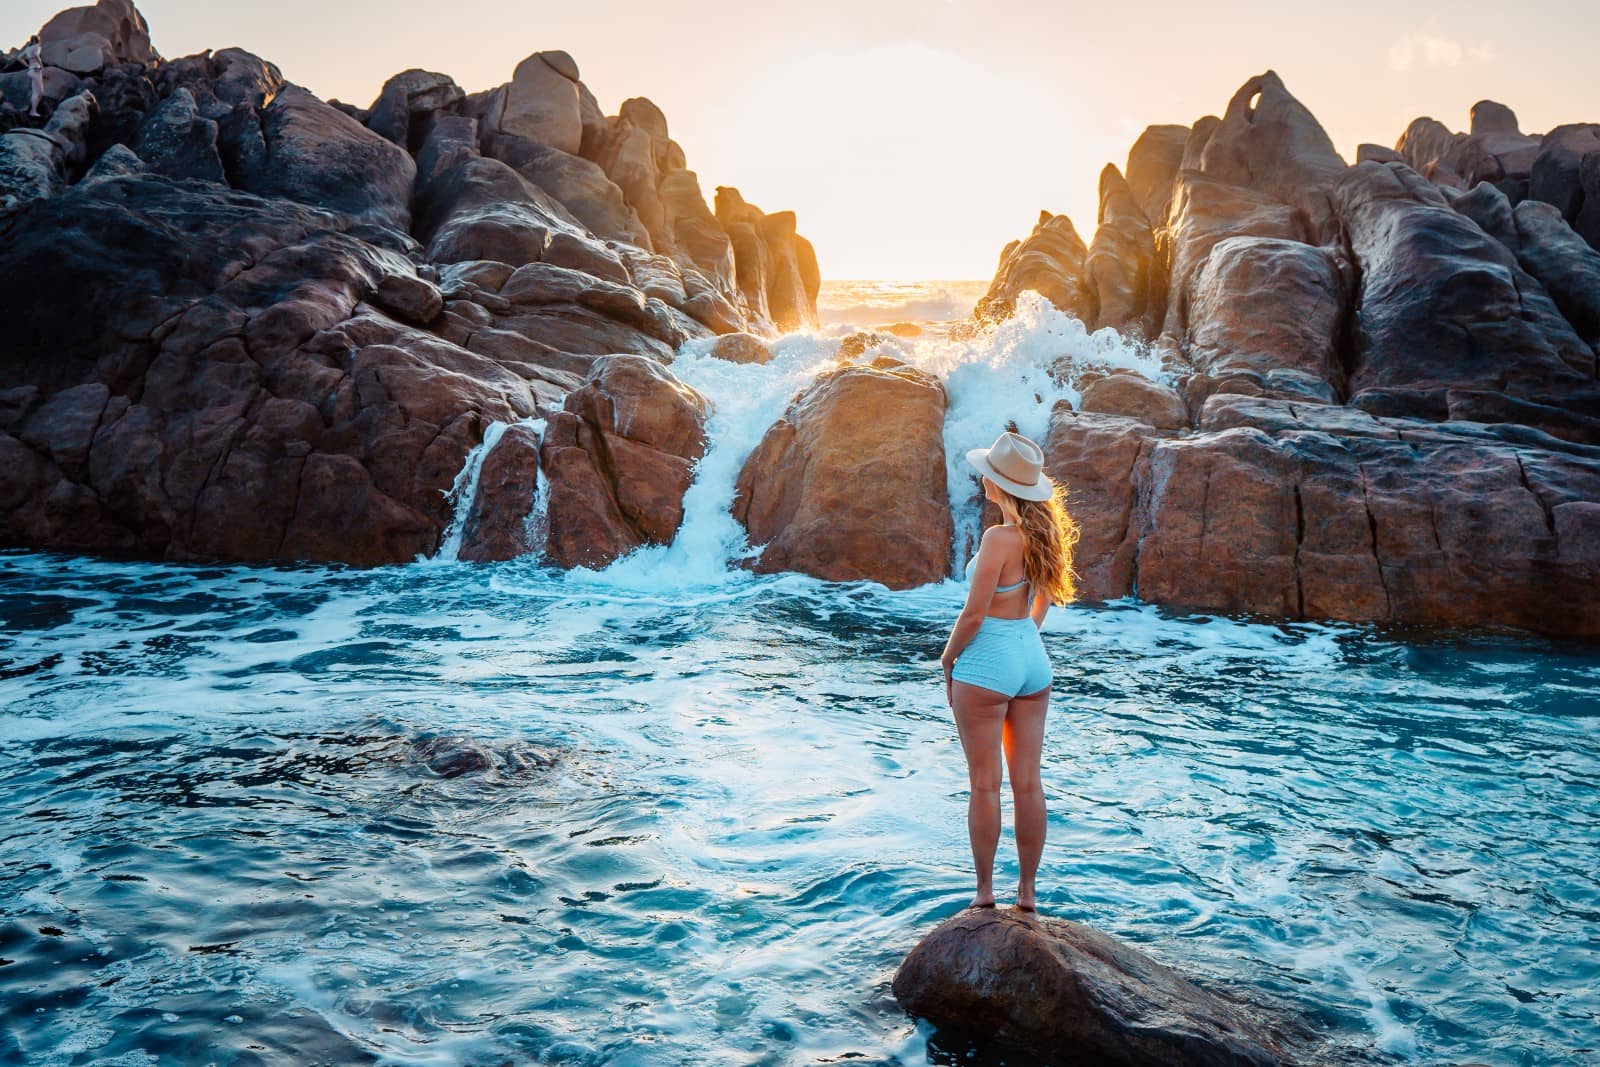 A person stands on a rock at the edge of Injidup Natural Spa in Yallingup, Western Australia, admiring the dynamic interaction of waves crashing against the rugged rocky shore at sunset